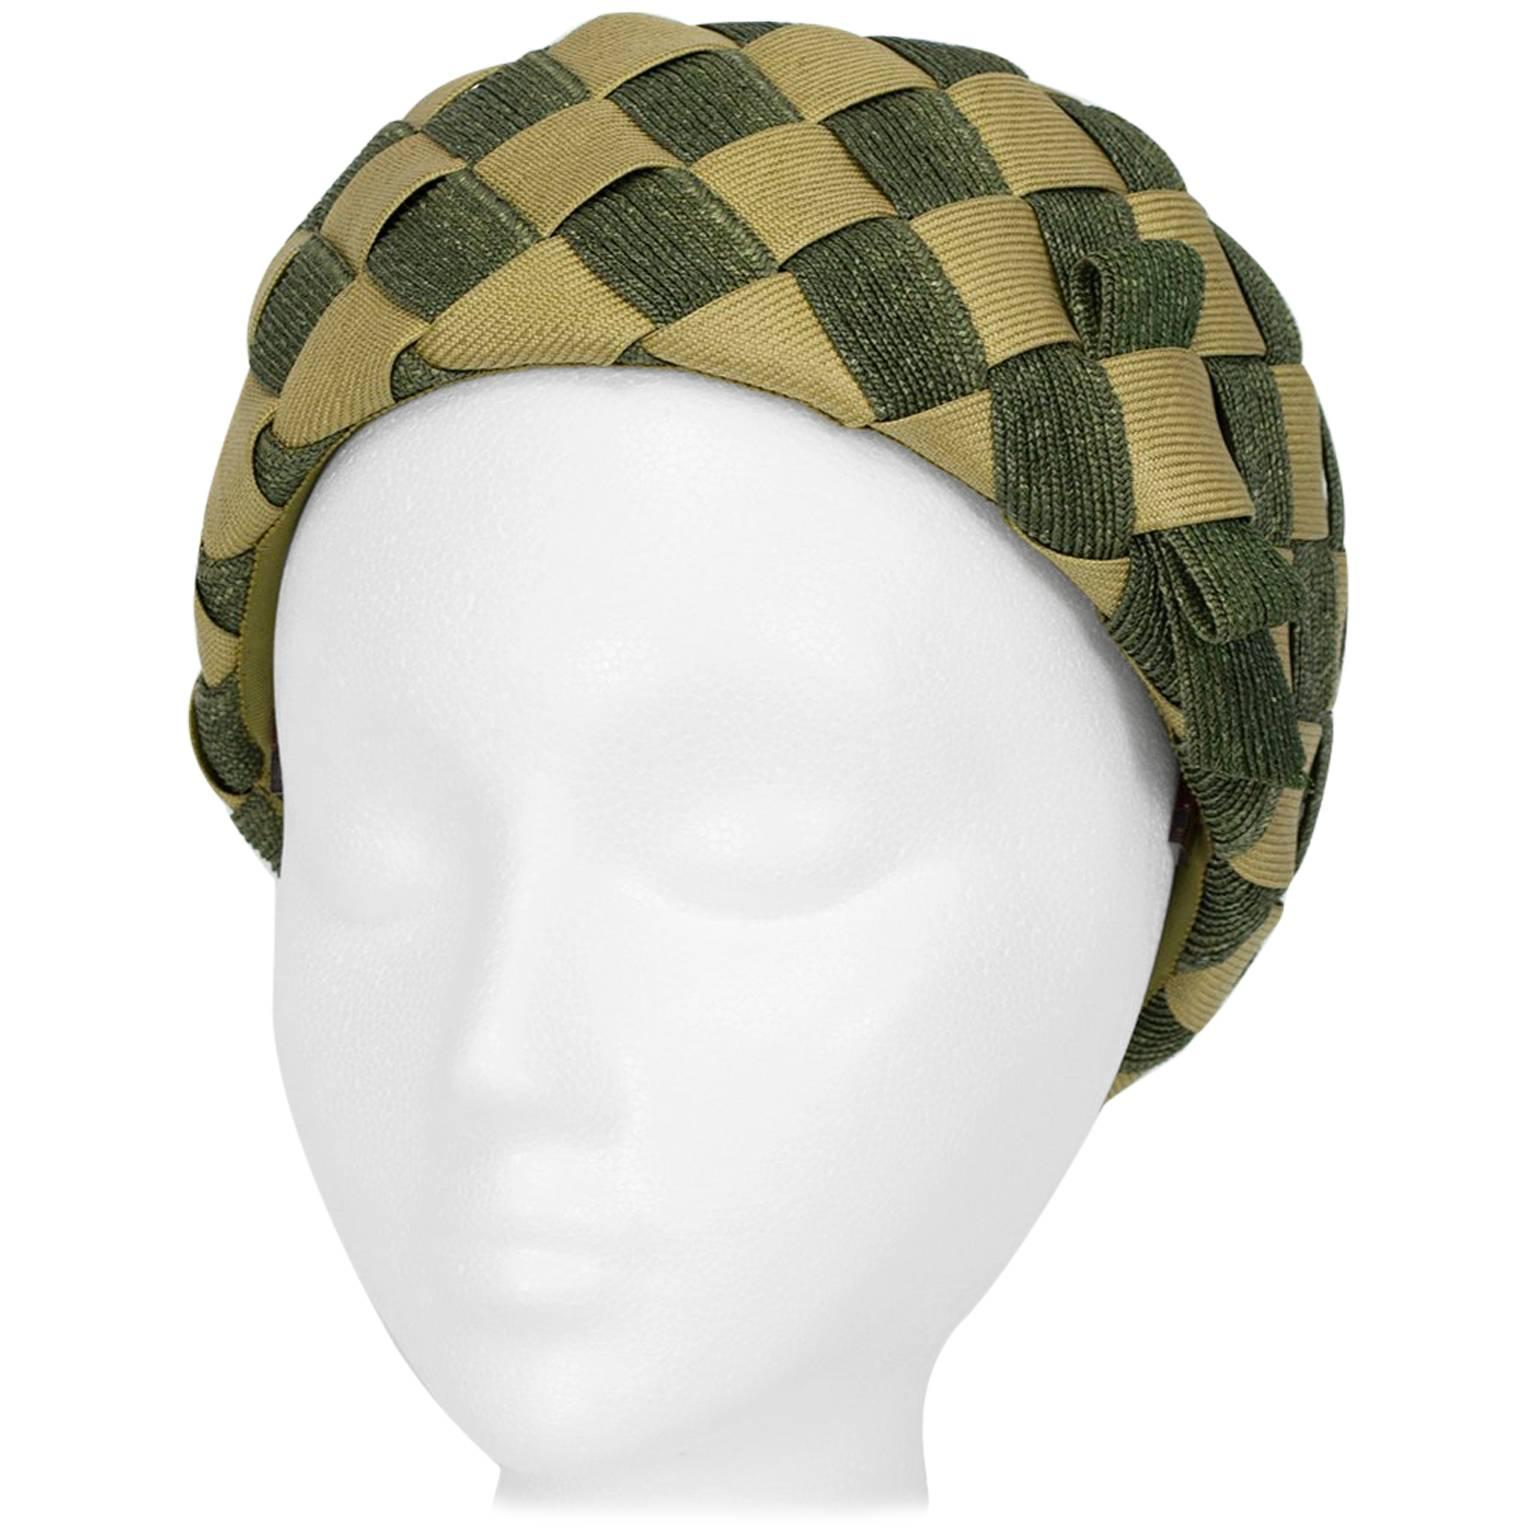 Christian Dior Chapeaux Woven Checkerboard Pillbox Hat, 1960s